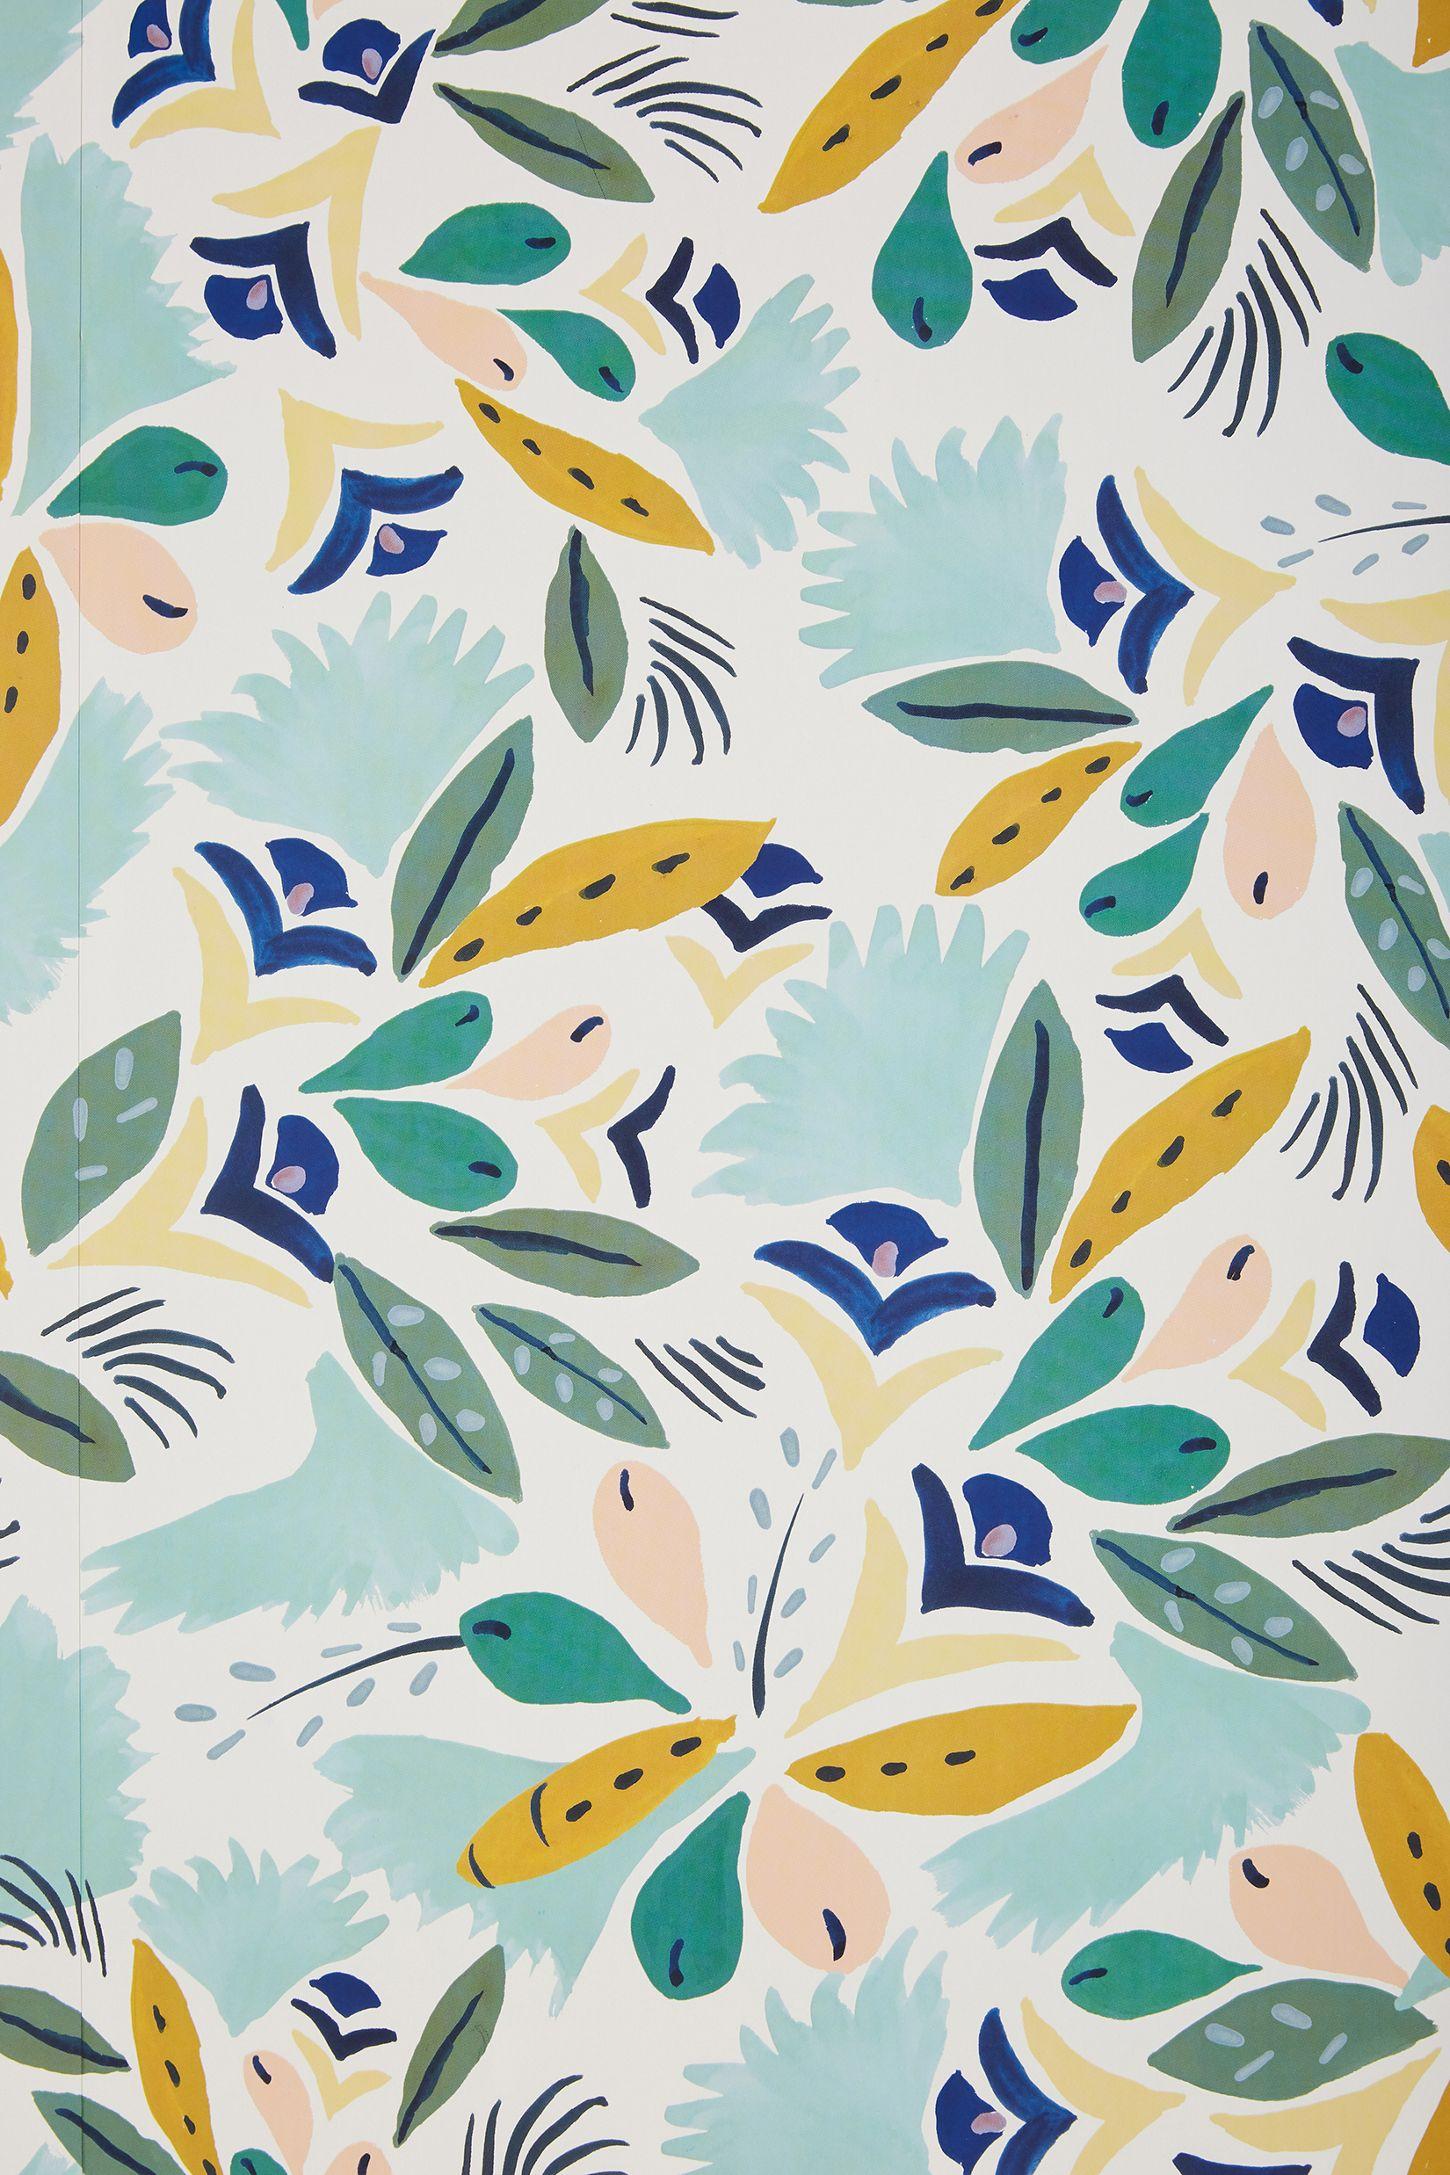 Anthropologie Wallpapers - Wallpaper Cave